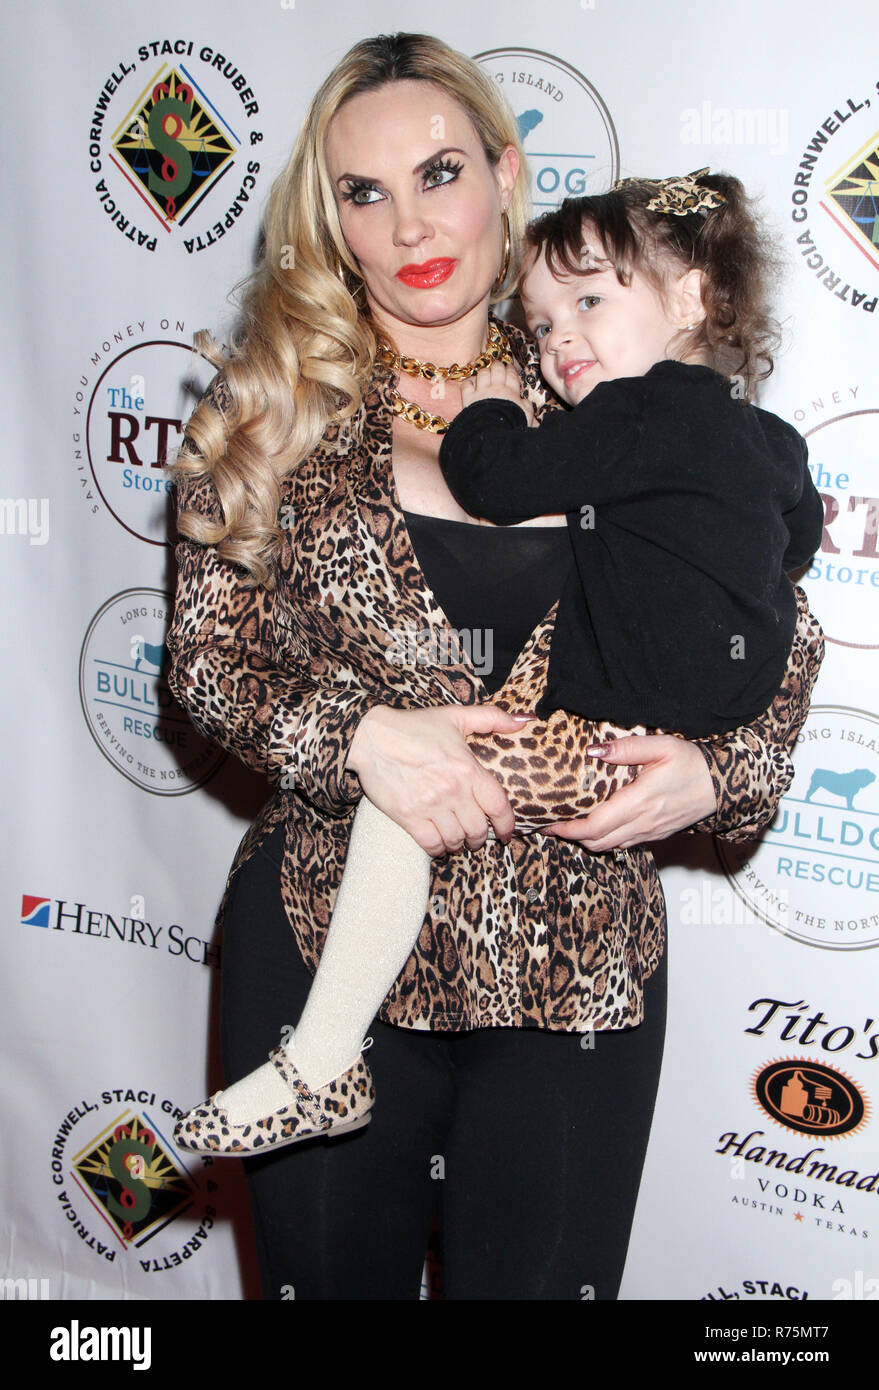 New York, NY, USA. 07th Dec, 2018. Coco Austin and Chanel Nicole Marrow host Bash For Fhe Bulldogs at the NYU Rosenthal Pavilion Kimmel Center in New York. December 07, 2018 Credit: Rw/Media Punch/Alamy Live News Stock Photo